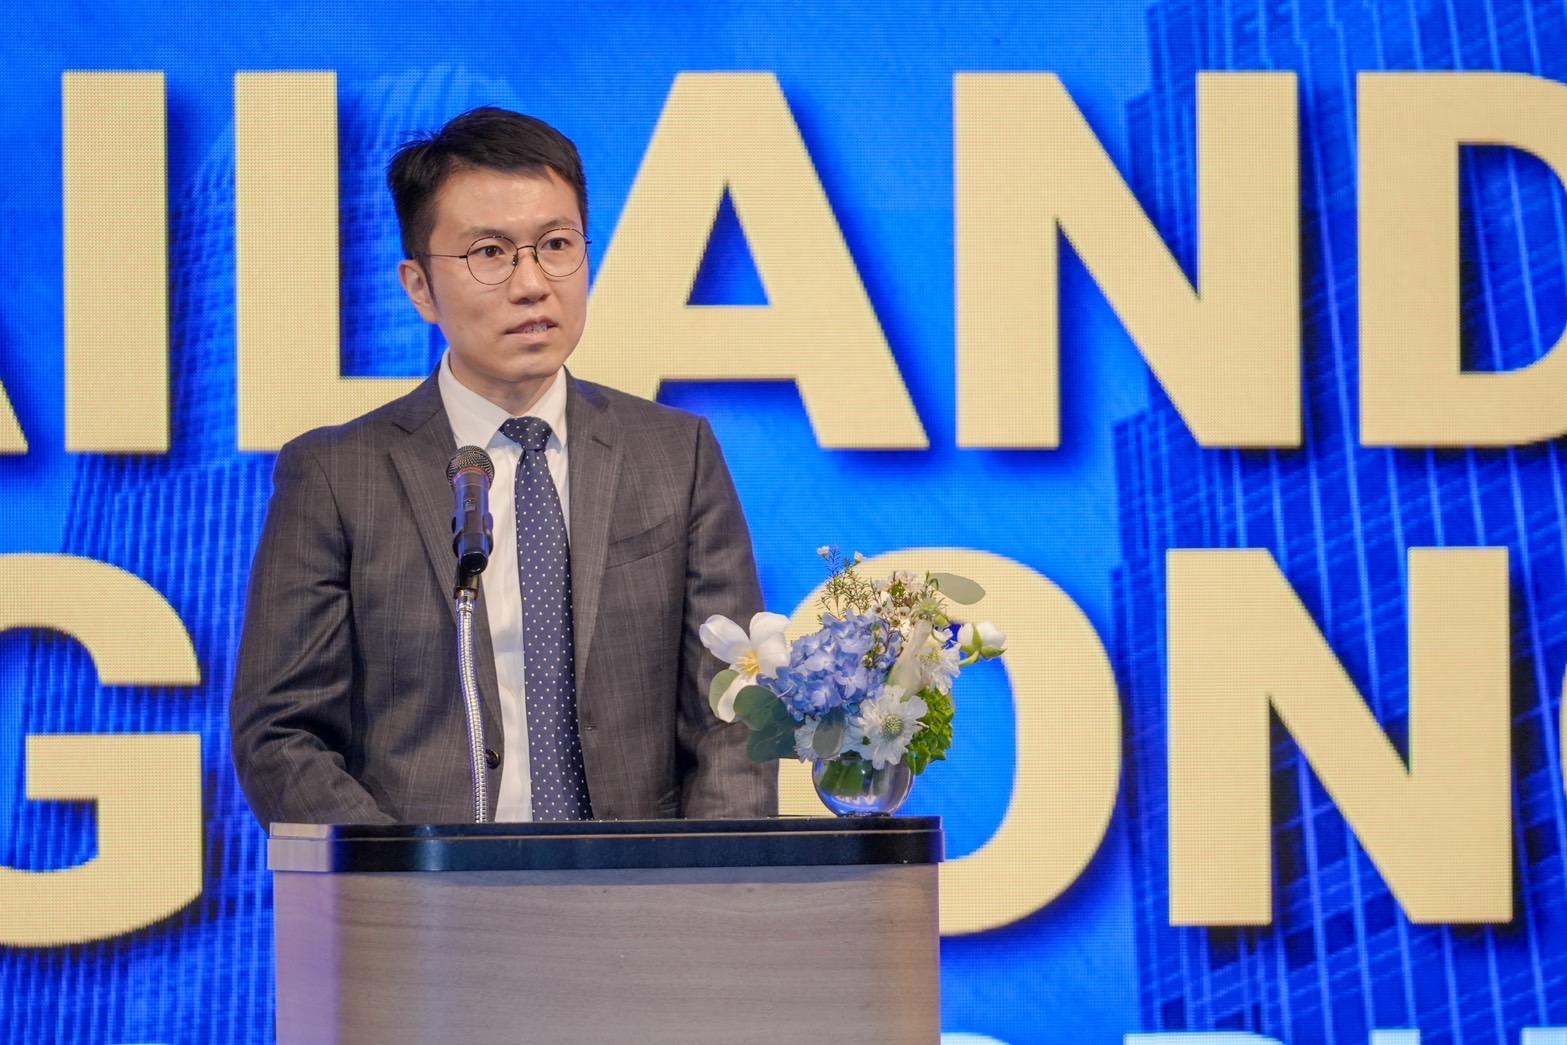 The Director of the Hong Kong Economic and Trade Office in Bangkok, Mr Parson Lam, delivers welcoming remarks in the Thailand-Hong Kong Business Forum today (March 18).